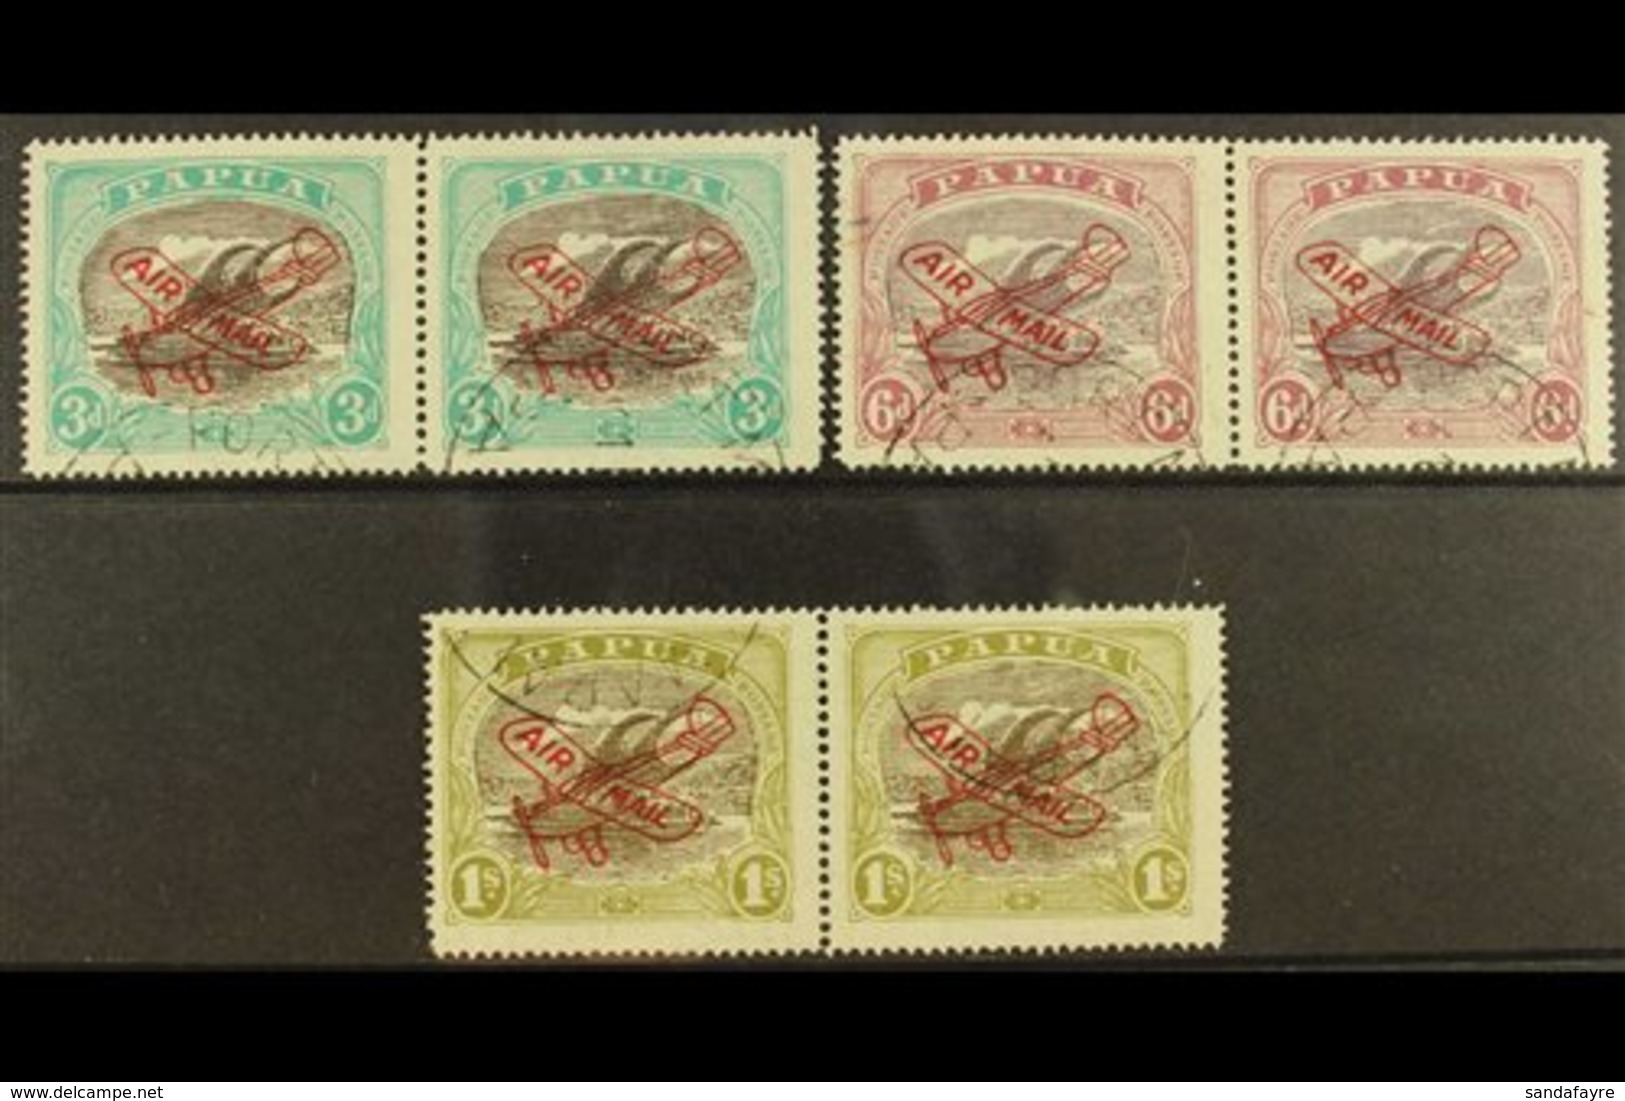 1930 Air Set, Ash Printing, SG 118-120, Each In A Horizontal Pair With One In Each Showing RIFT IN CLOUD, Fine Cds Used. - Papua Nuova Guinea